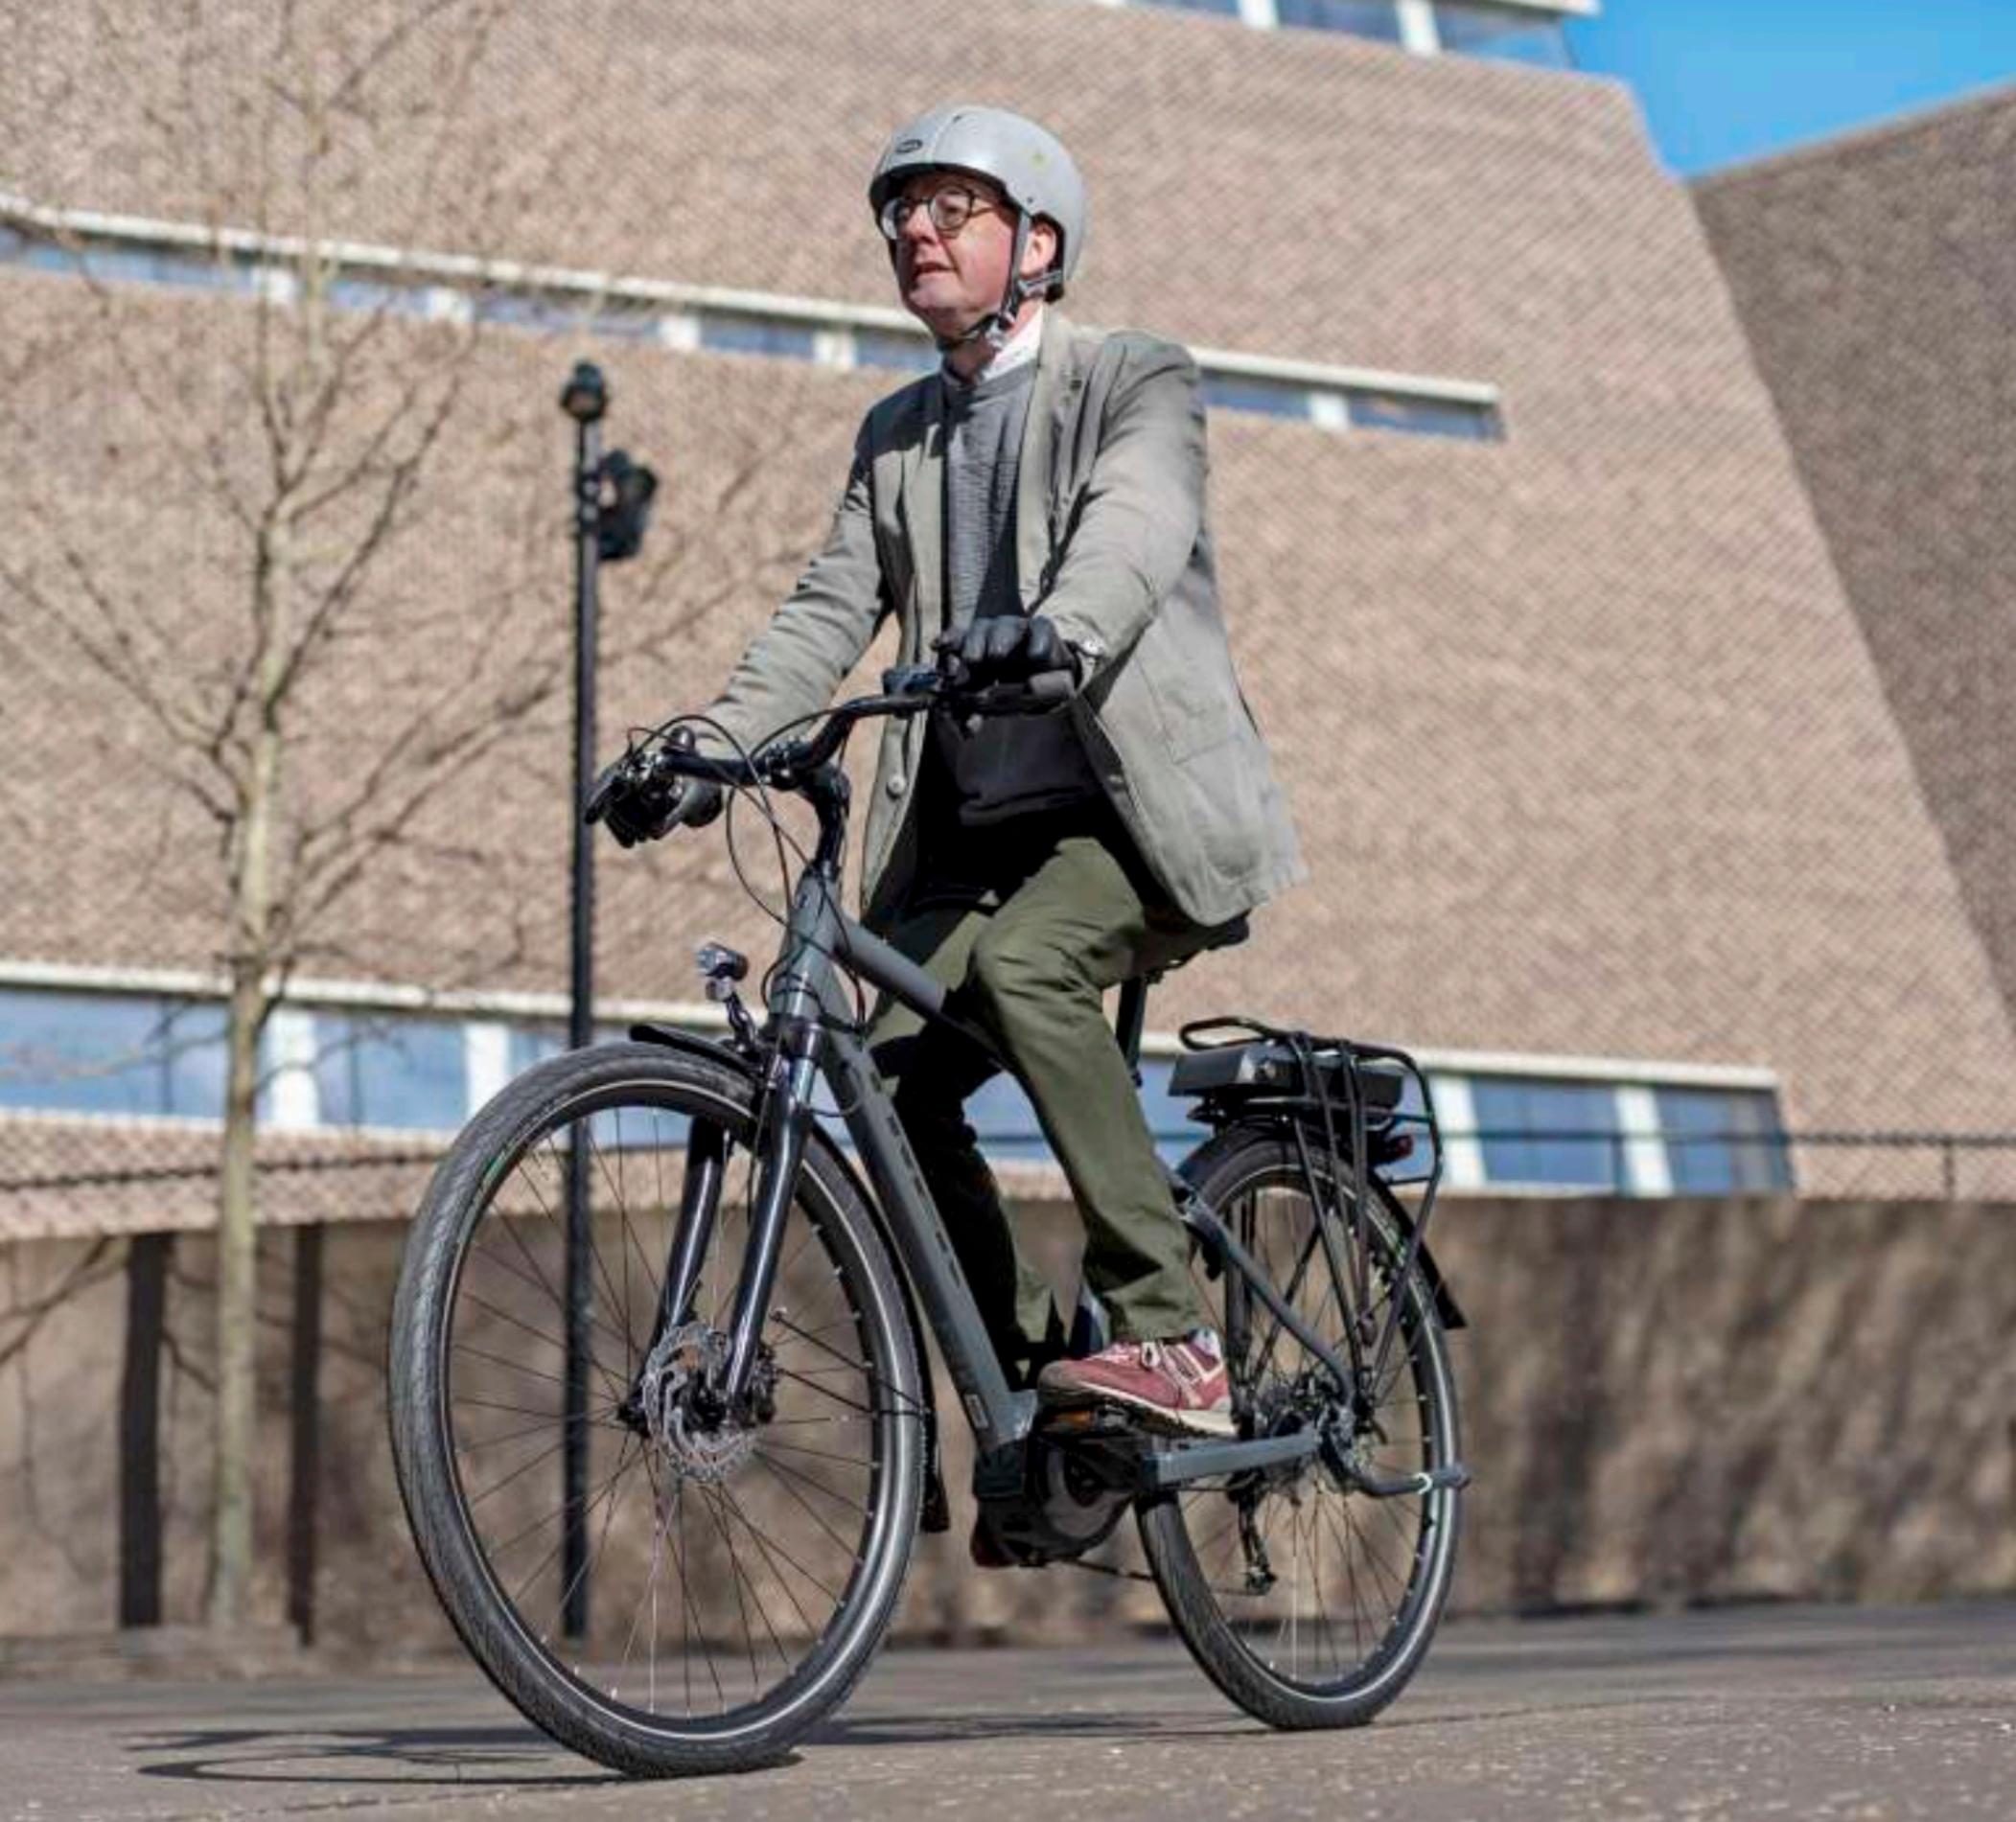 E-bikes suit a wider diversity of age because of ‘their potential to reduce physical exertion’